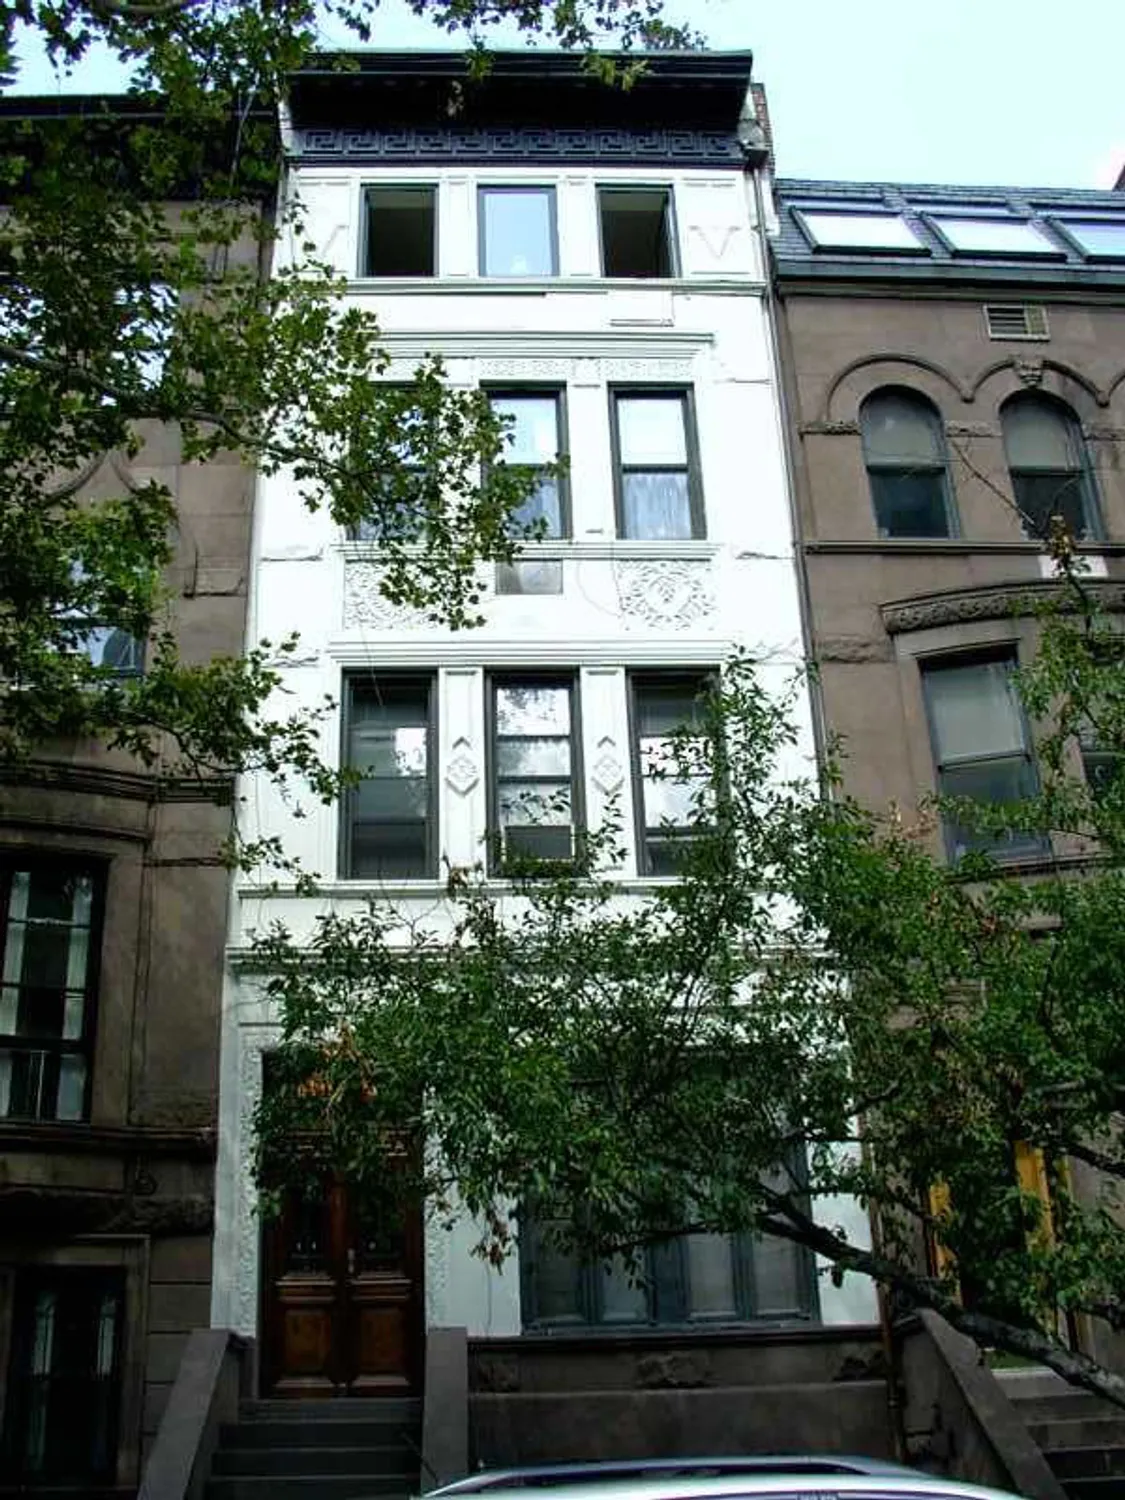 Well-maintained pre-war brownstone, 2 flights up.